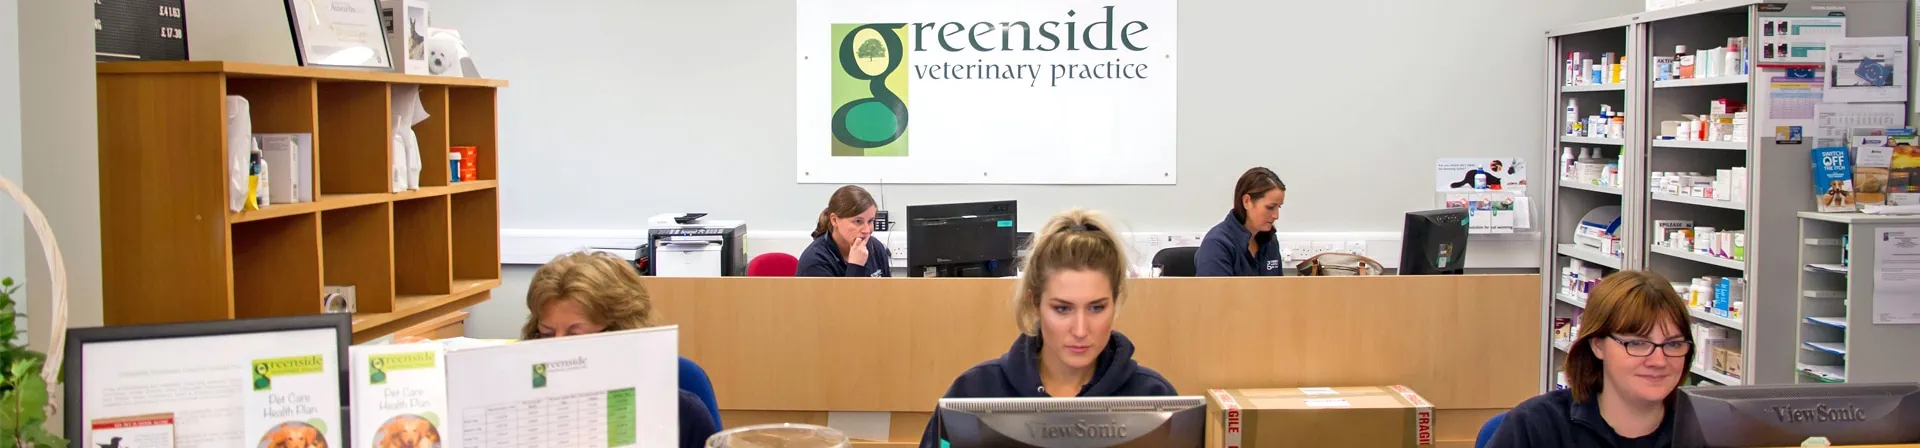 Our Prices | Affordable Vet Costs in St Boswells and Jedburgh | Greenside Vets